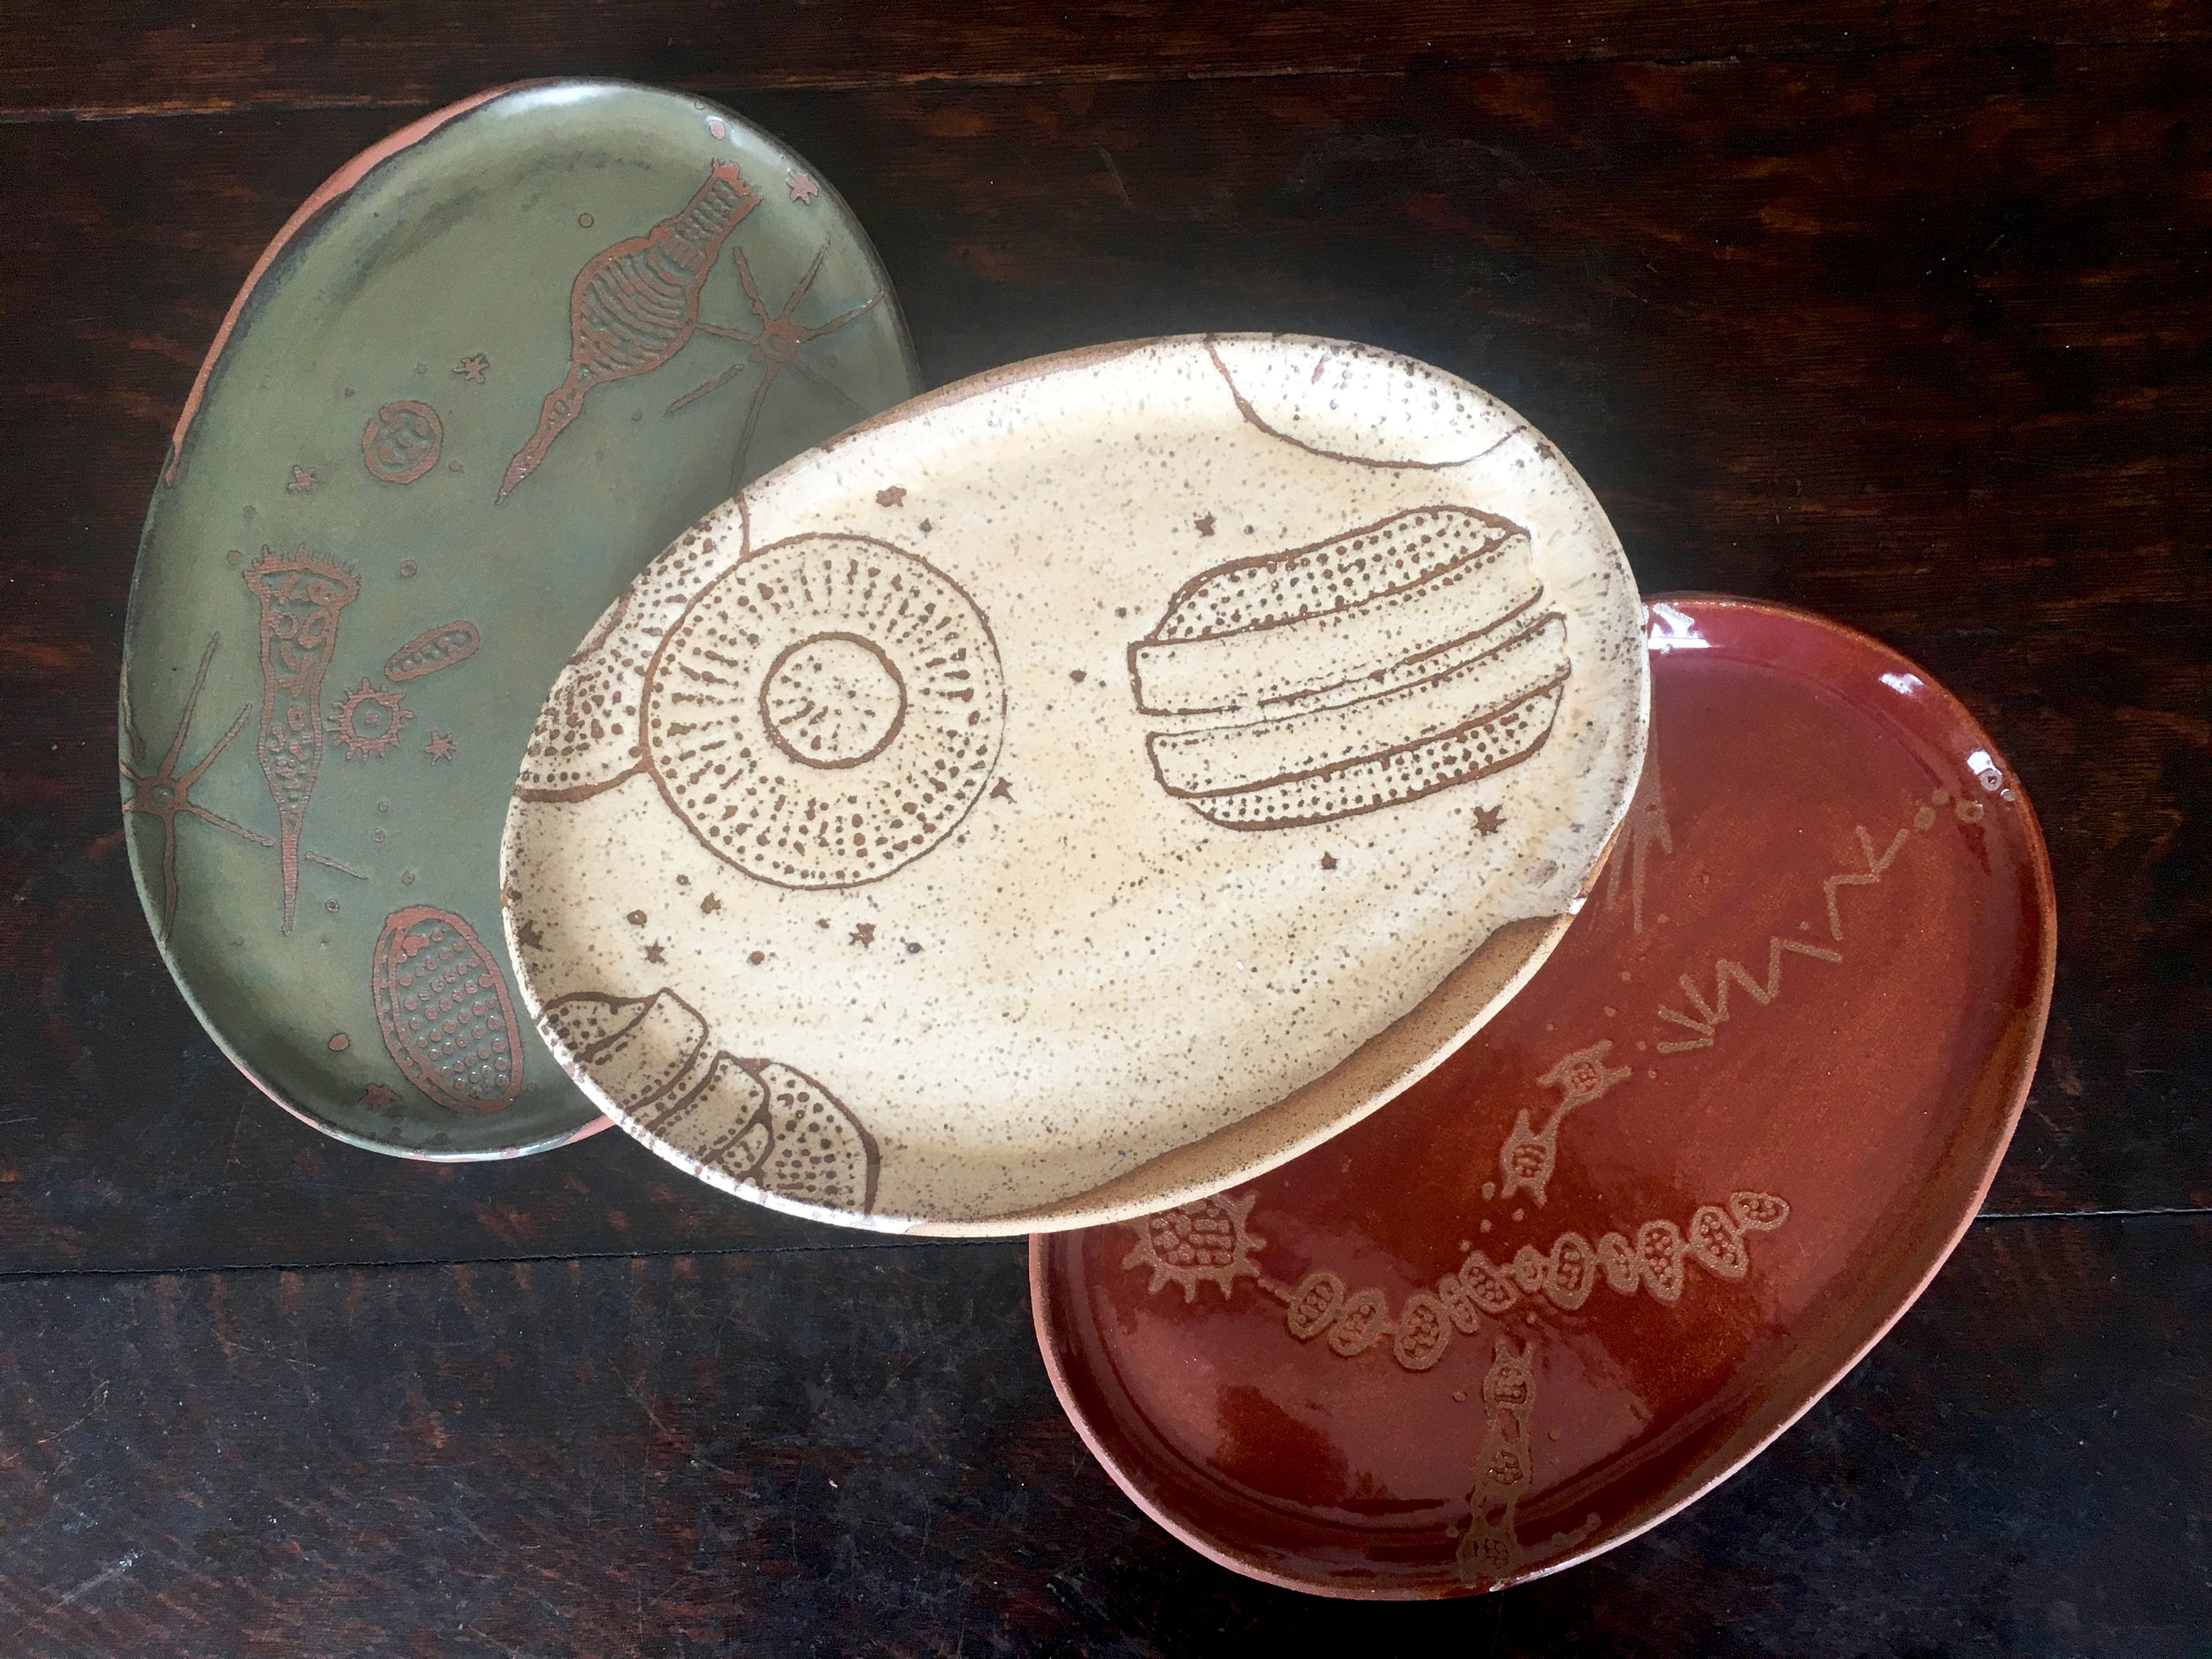  Platters are oval in small, medium &amp; large with a wide rim on the grand platter   Trio in moss on red clay, créme brûlée on speckled clay &amp; plum on red clay 